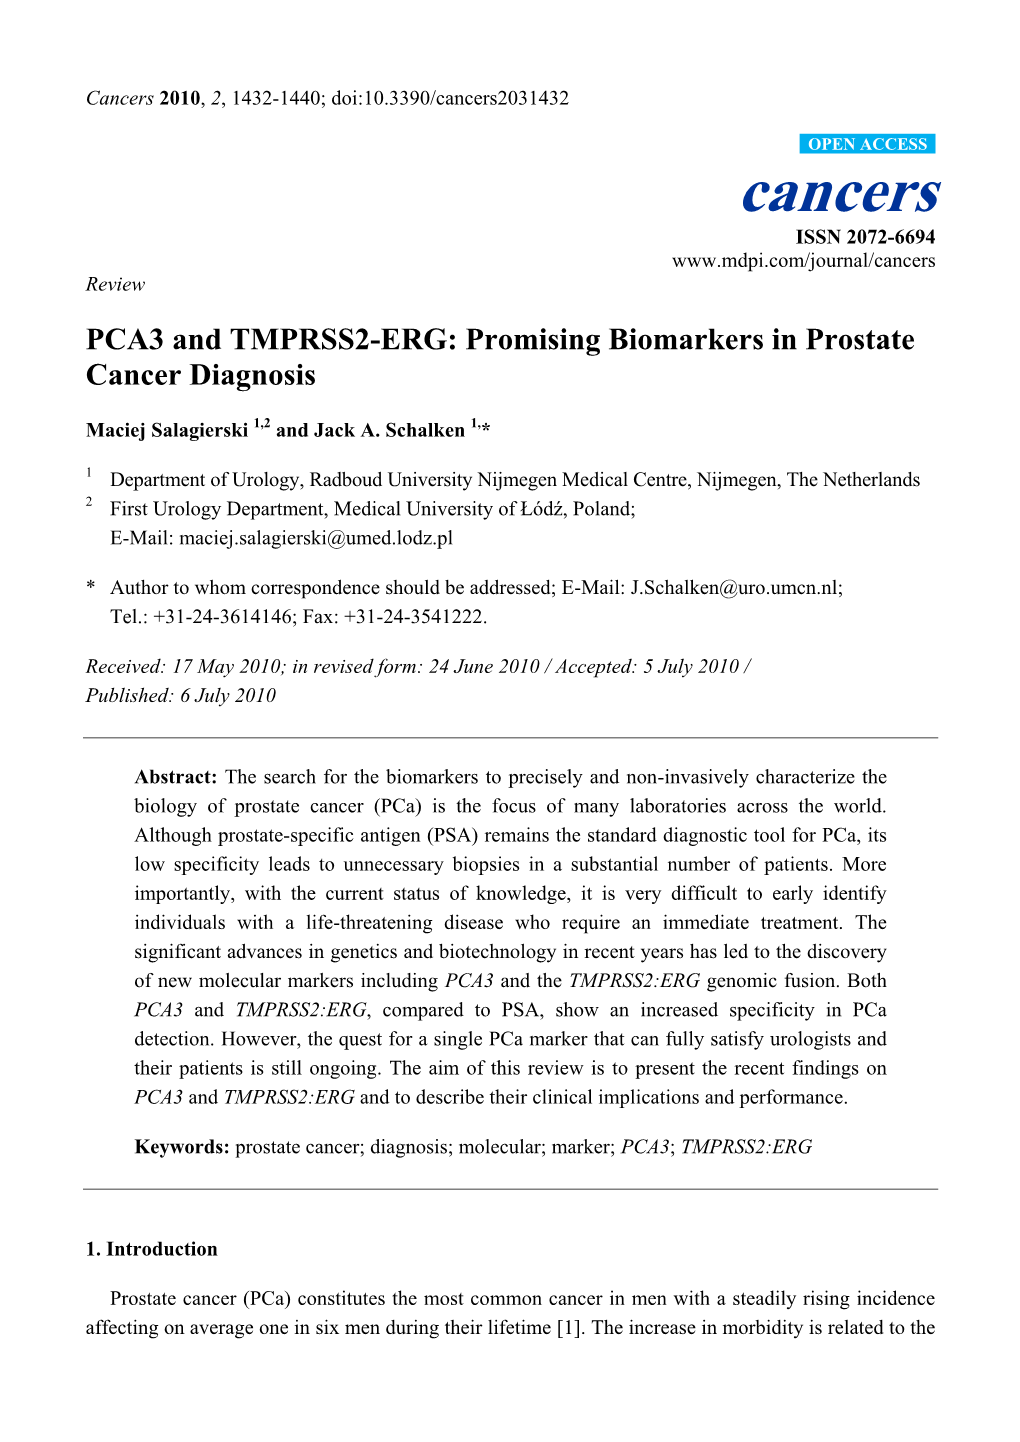 PCA3 and TMPRSS2-ERG: Promising Biomarkers in Prostate Cancer Diagnosis